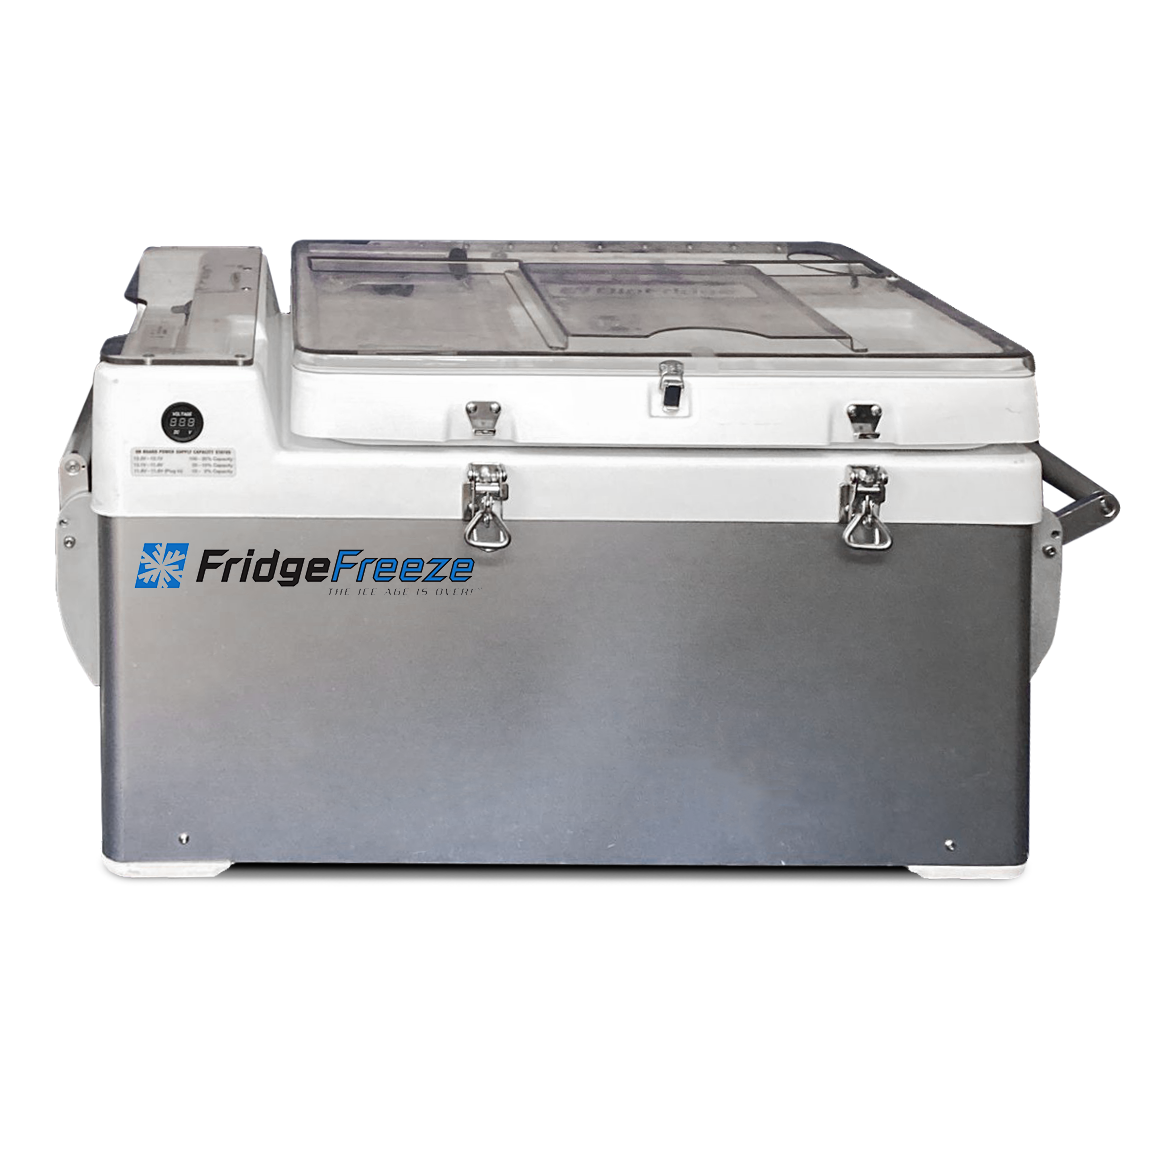 Portable Medical Refrigerator for Vaccines, Pharmacy, Blood Banks